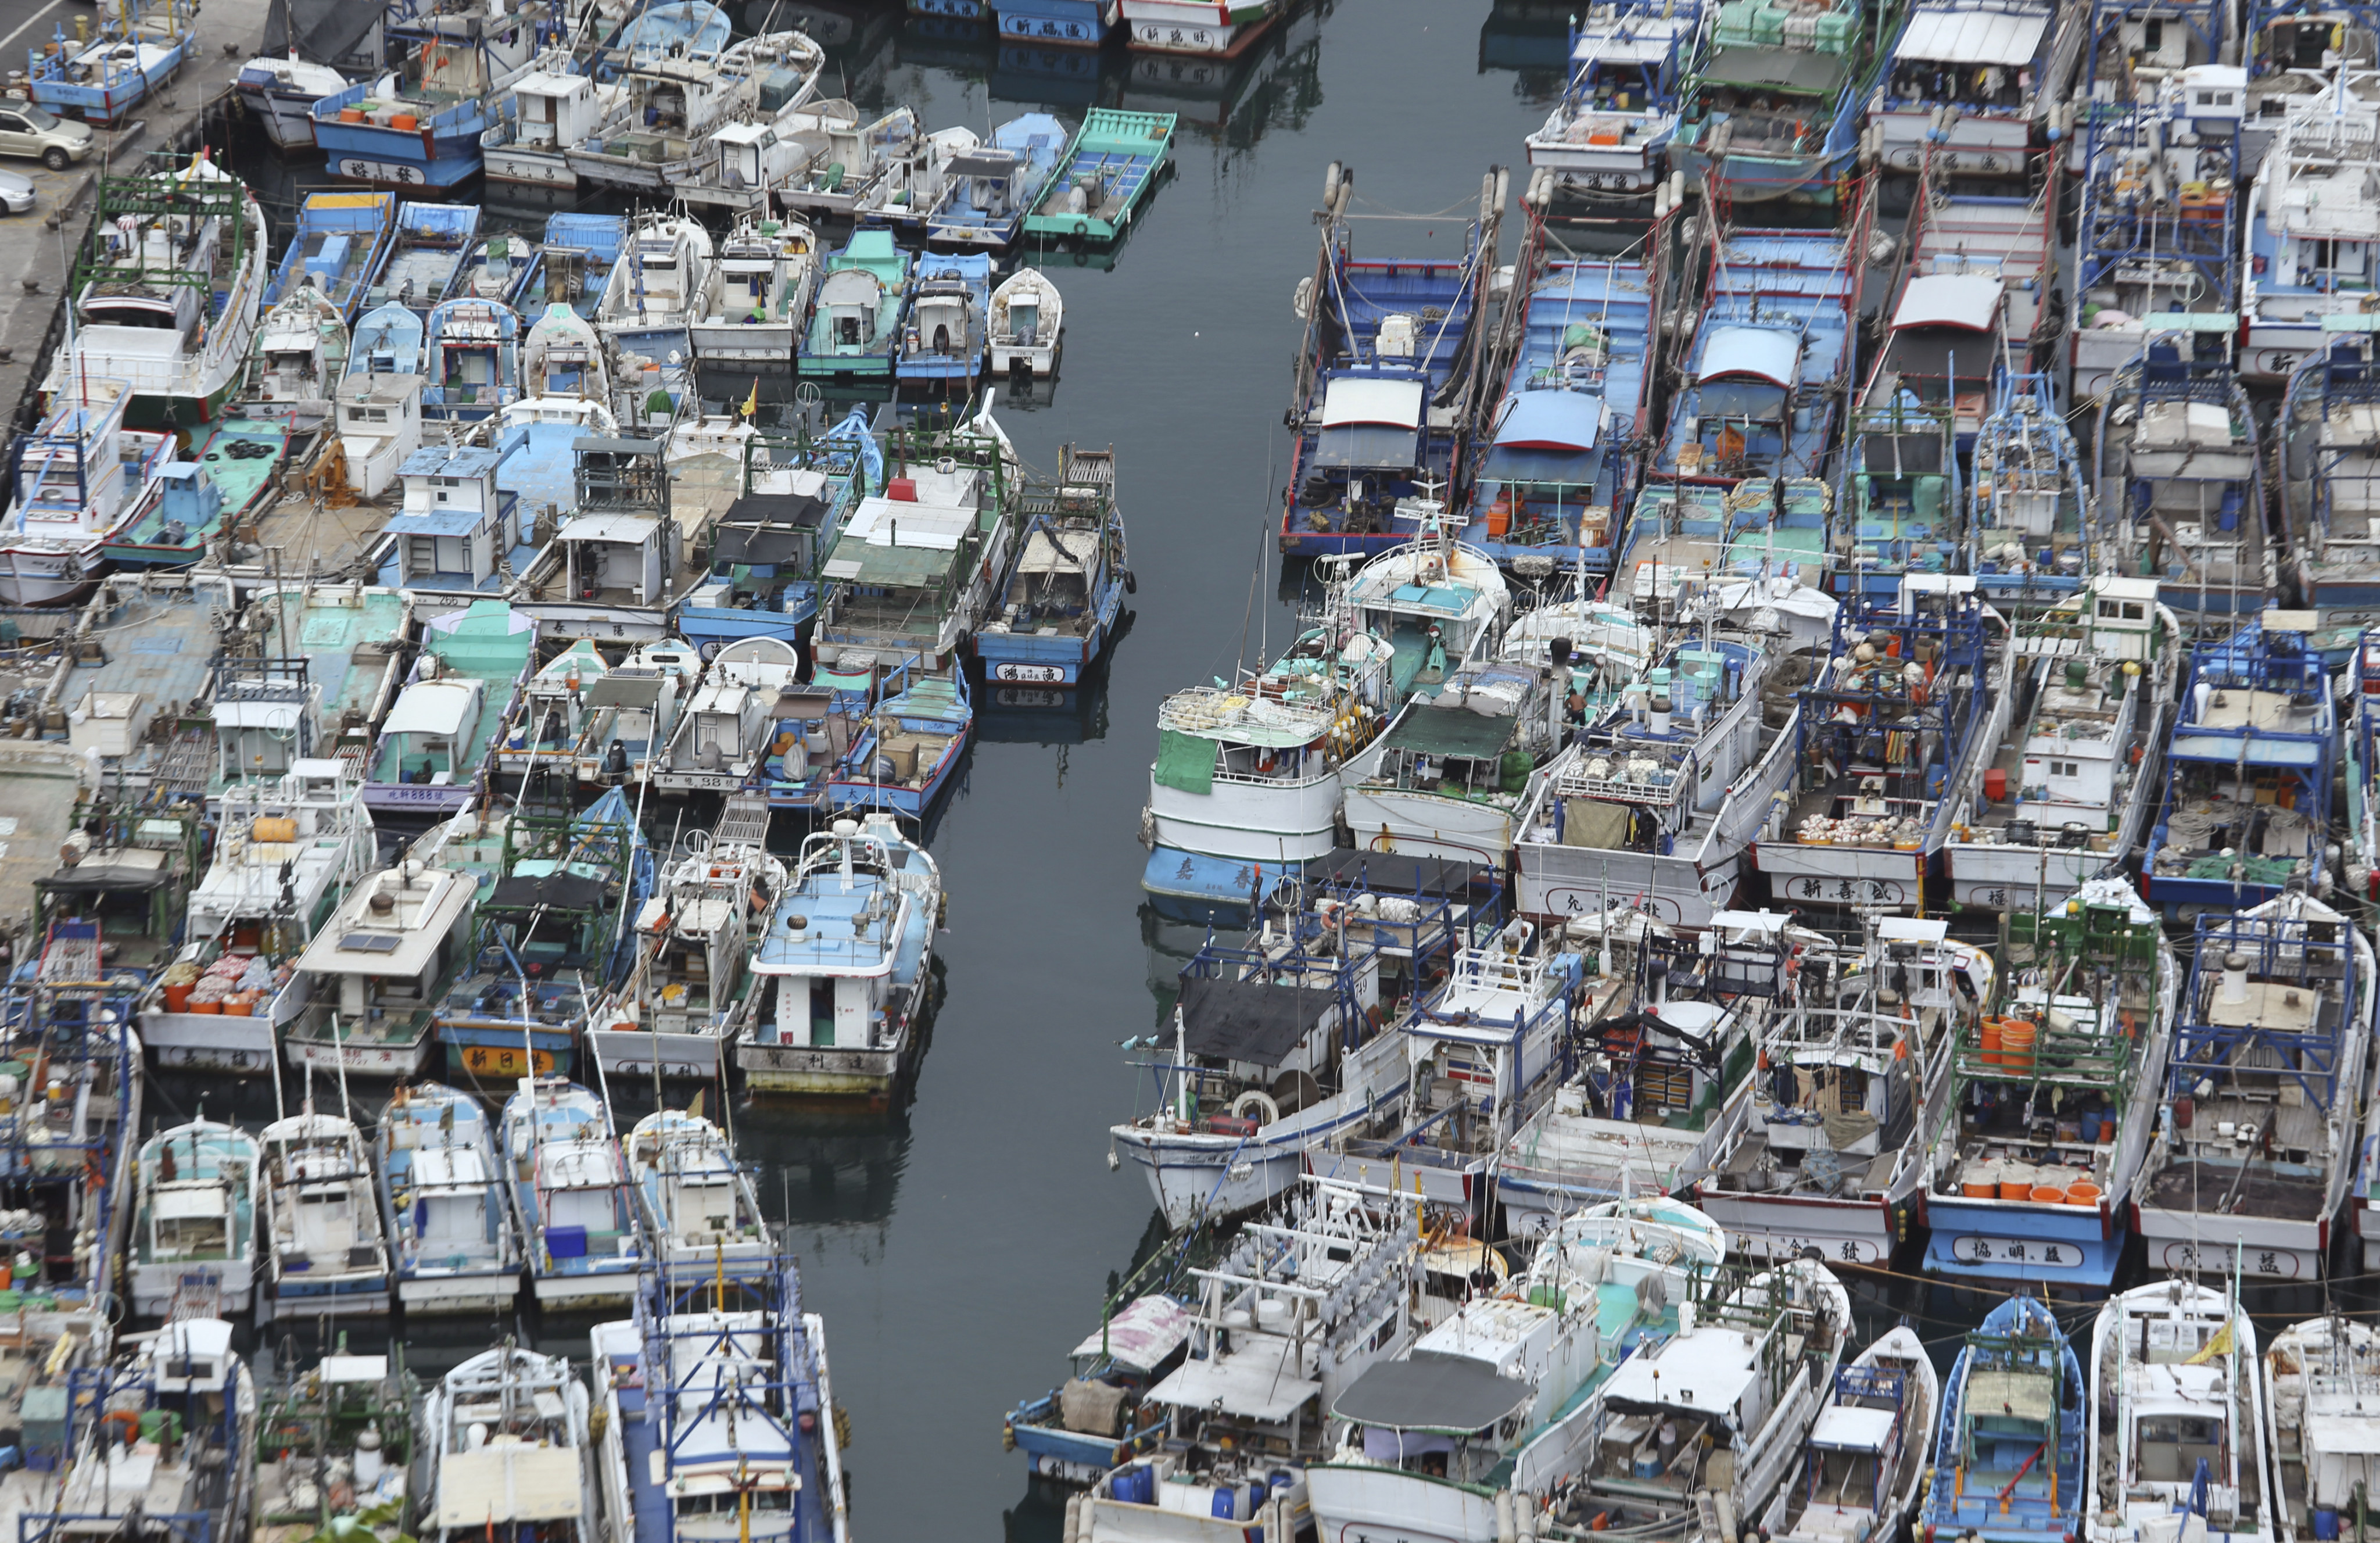 Taiwanese fishing boat operators have been reminded that they face fines and seizures if they are caught using the mainland’s satellite-based navigation system BeiDou. Photo: AP